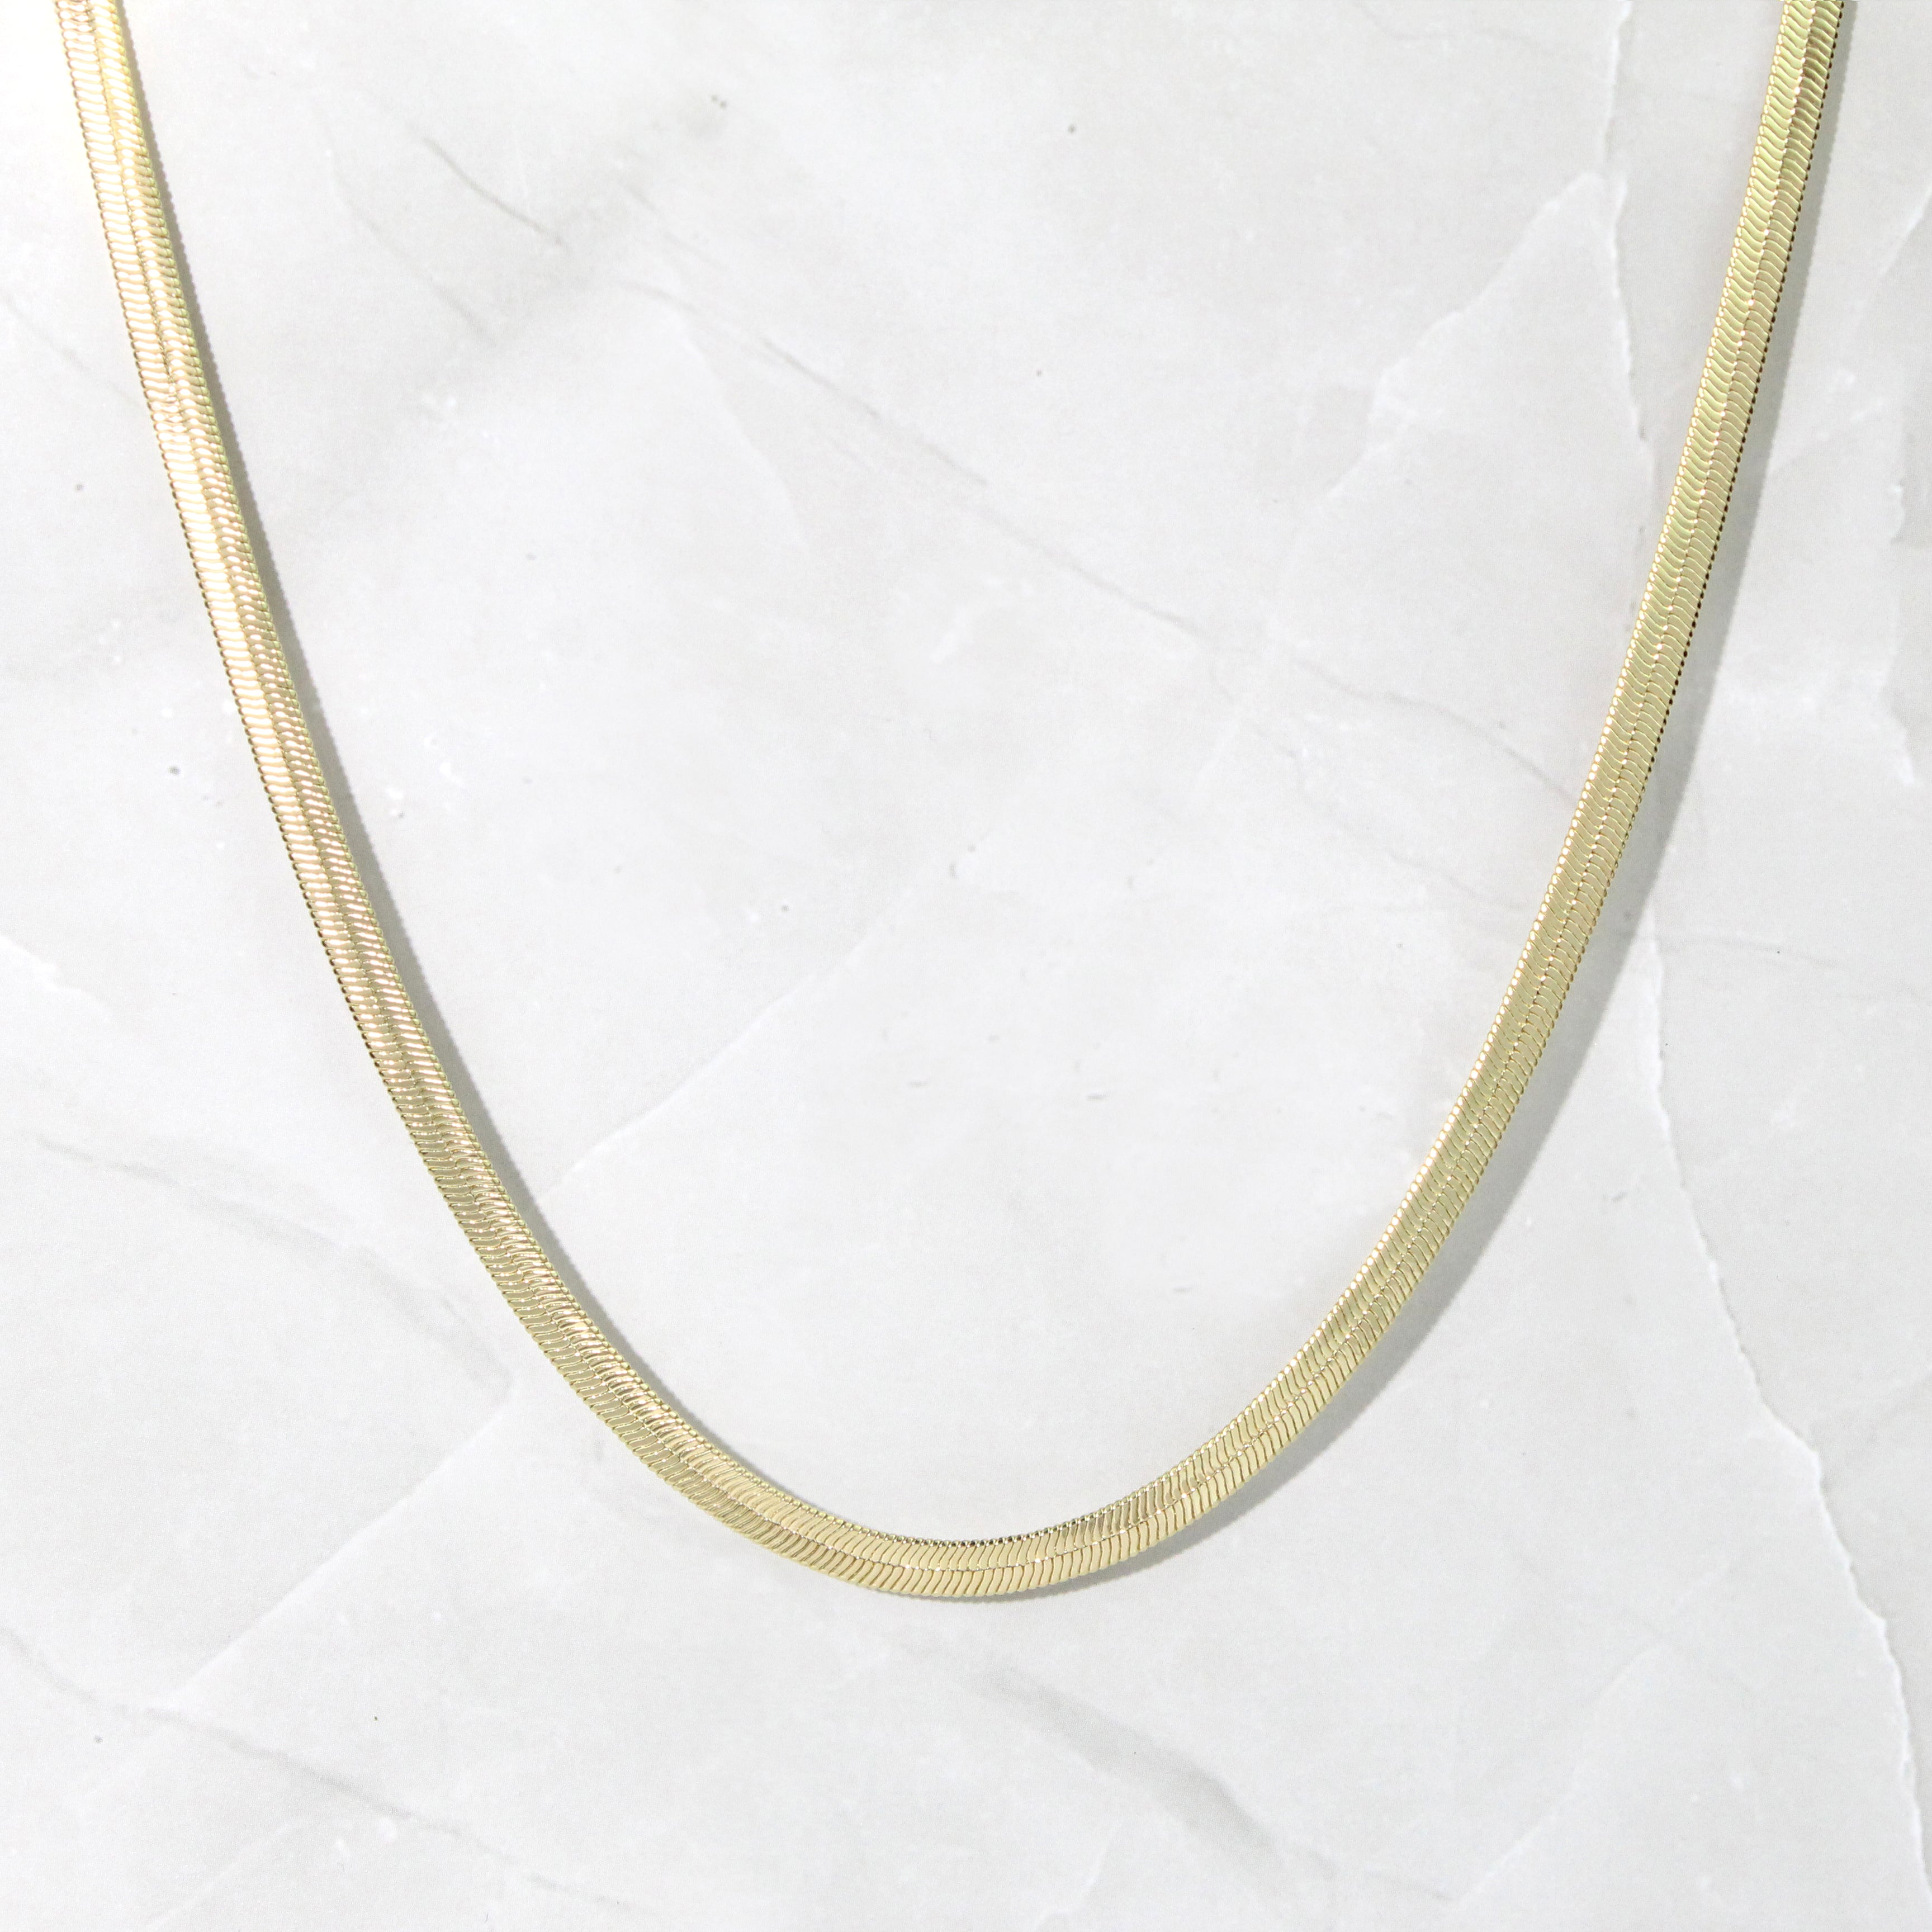 9mm Flexible Herringbone Chain Necklace 14K Yellow Gold-Plated Sterling  Silver | eBay